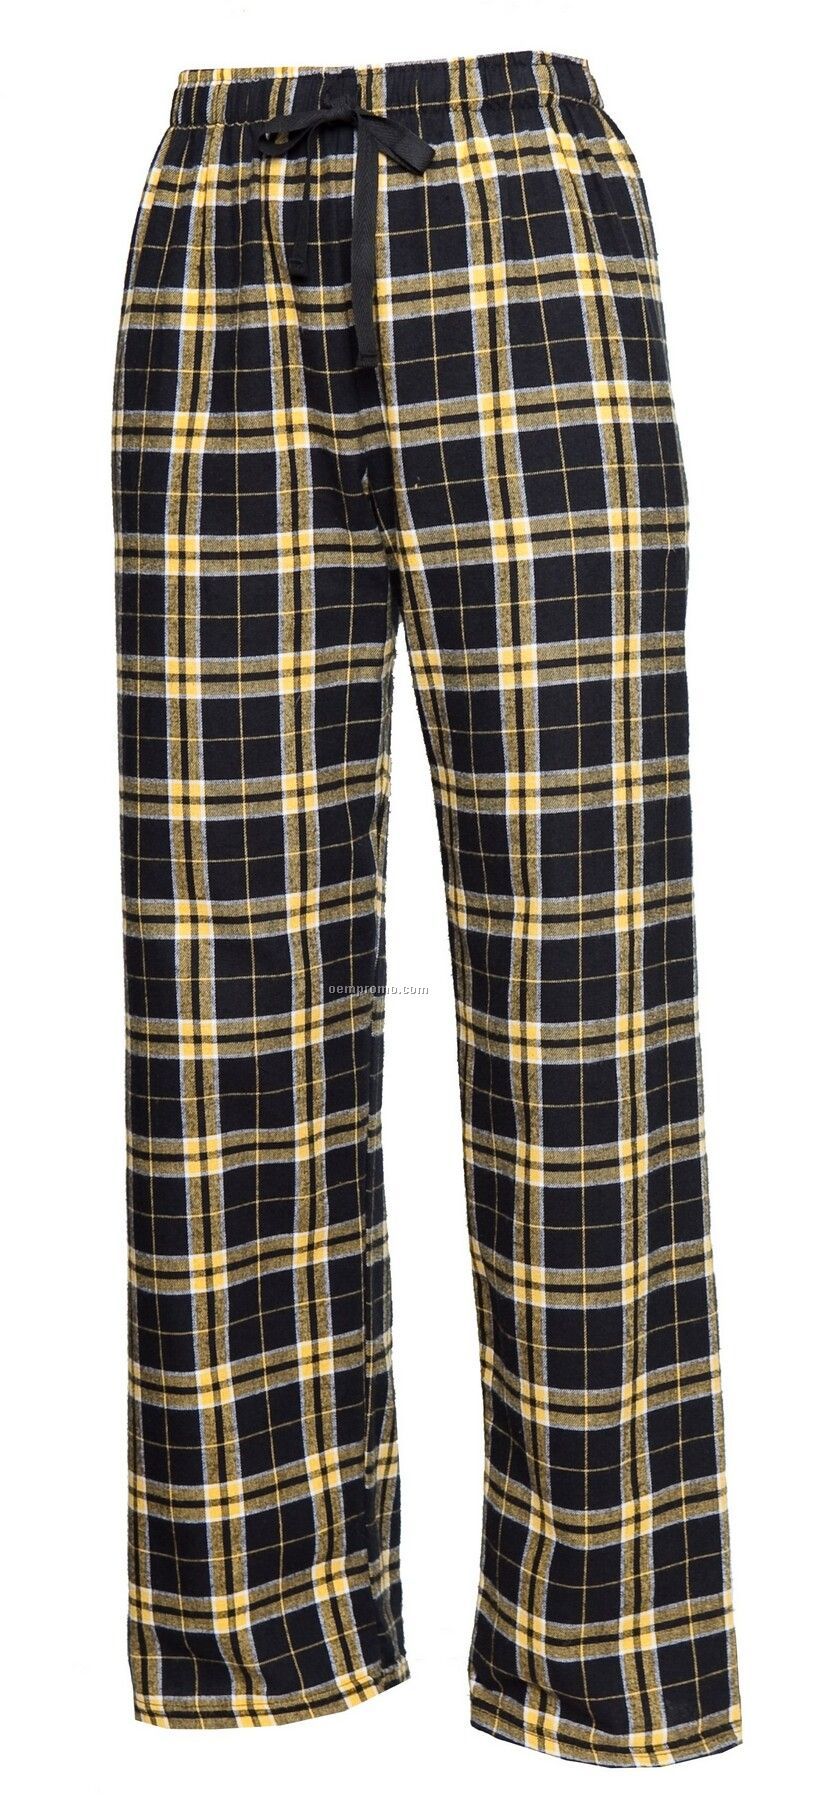 Youth Team Pride Flannel Pant In Black & Gold Plaid